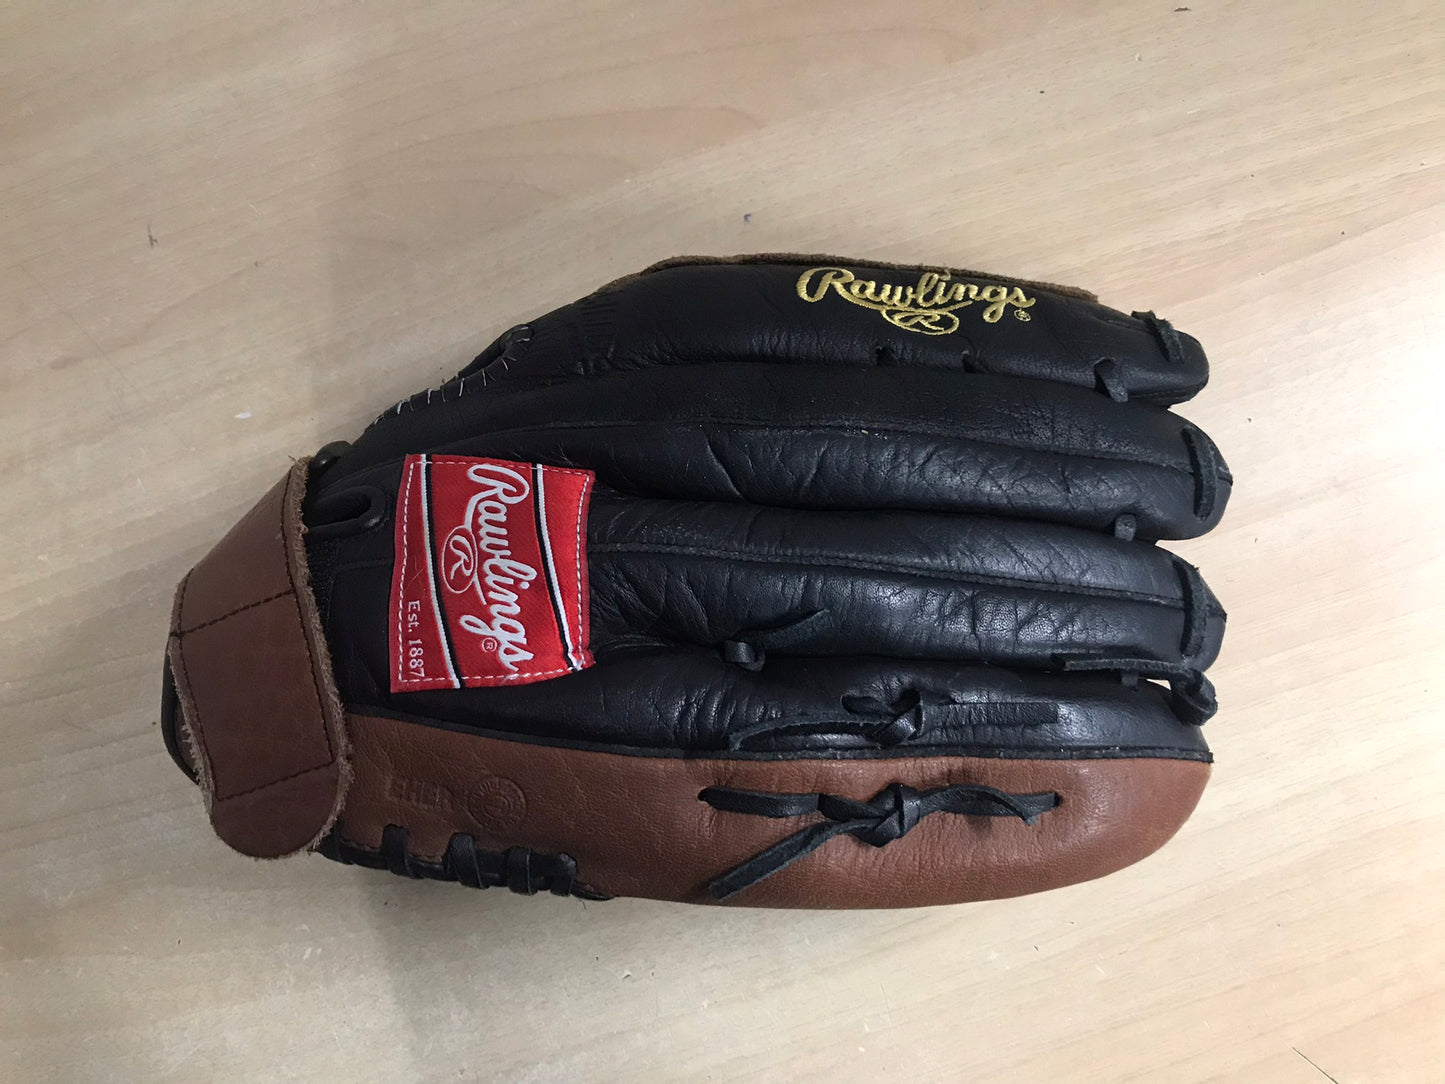 Baseball Glove Adult Size 13 inch Rawlings Black Brown All Leather Fits RIGHT Hand New Demo Model